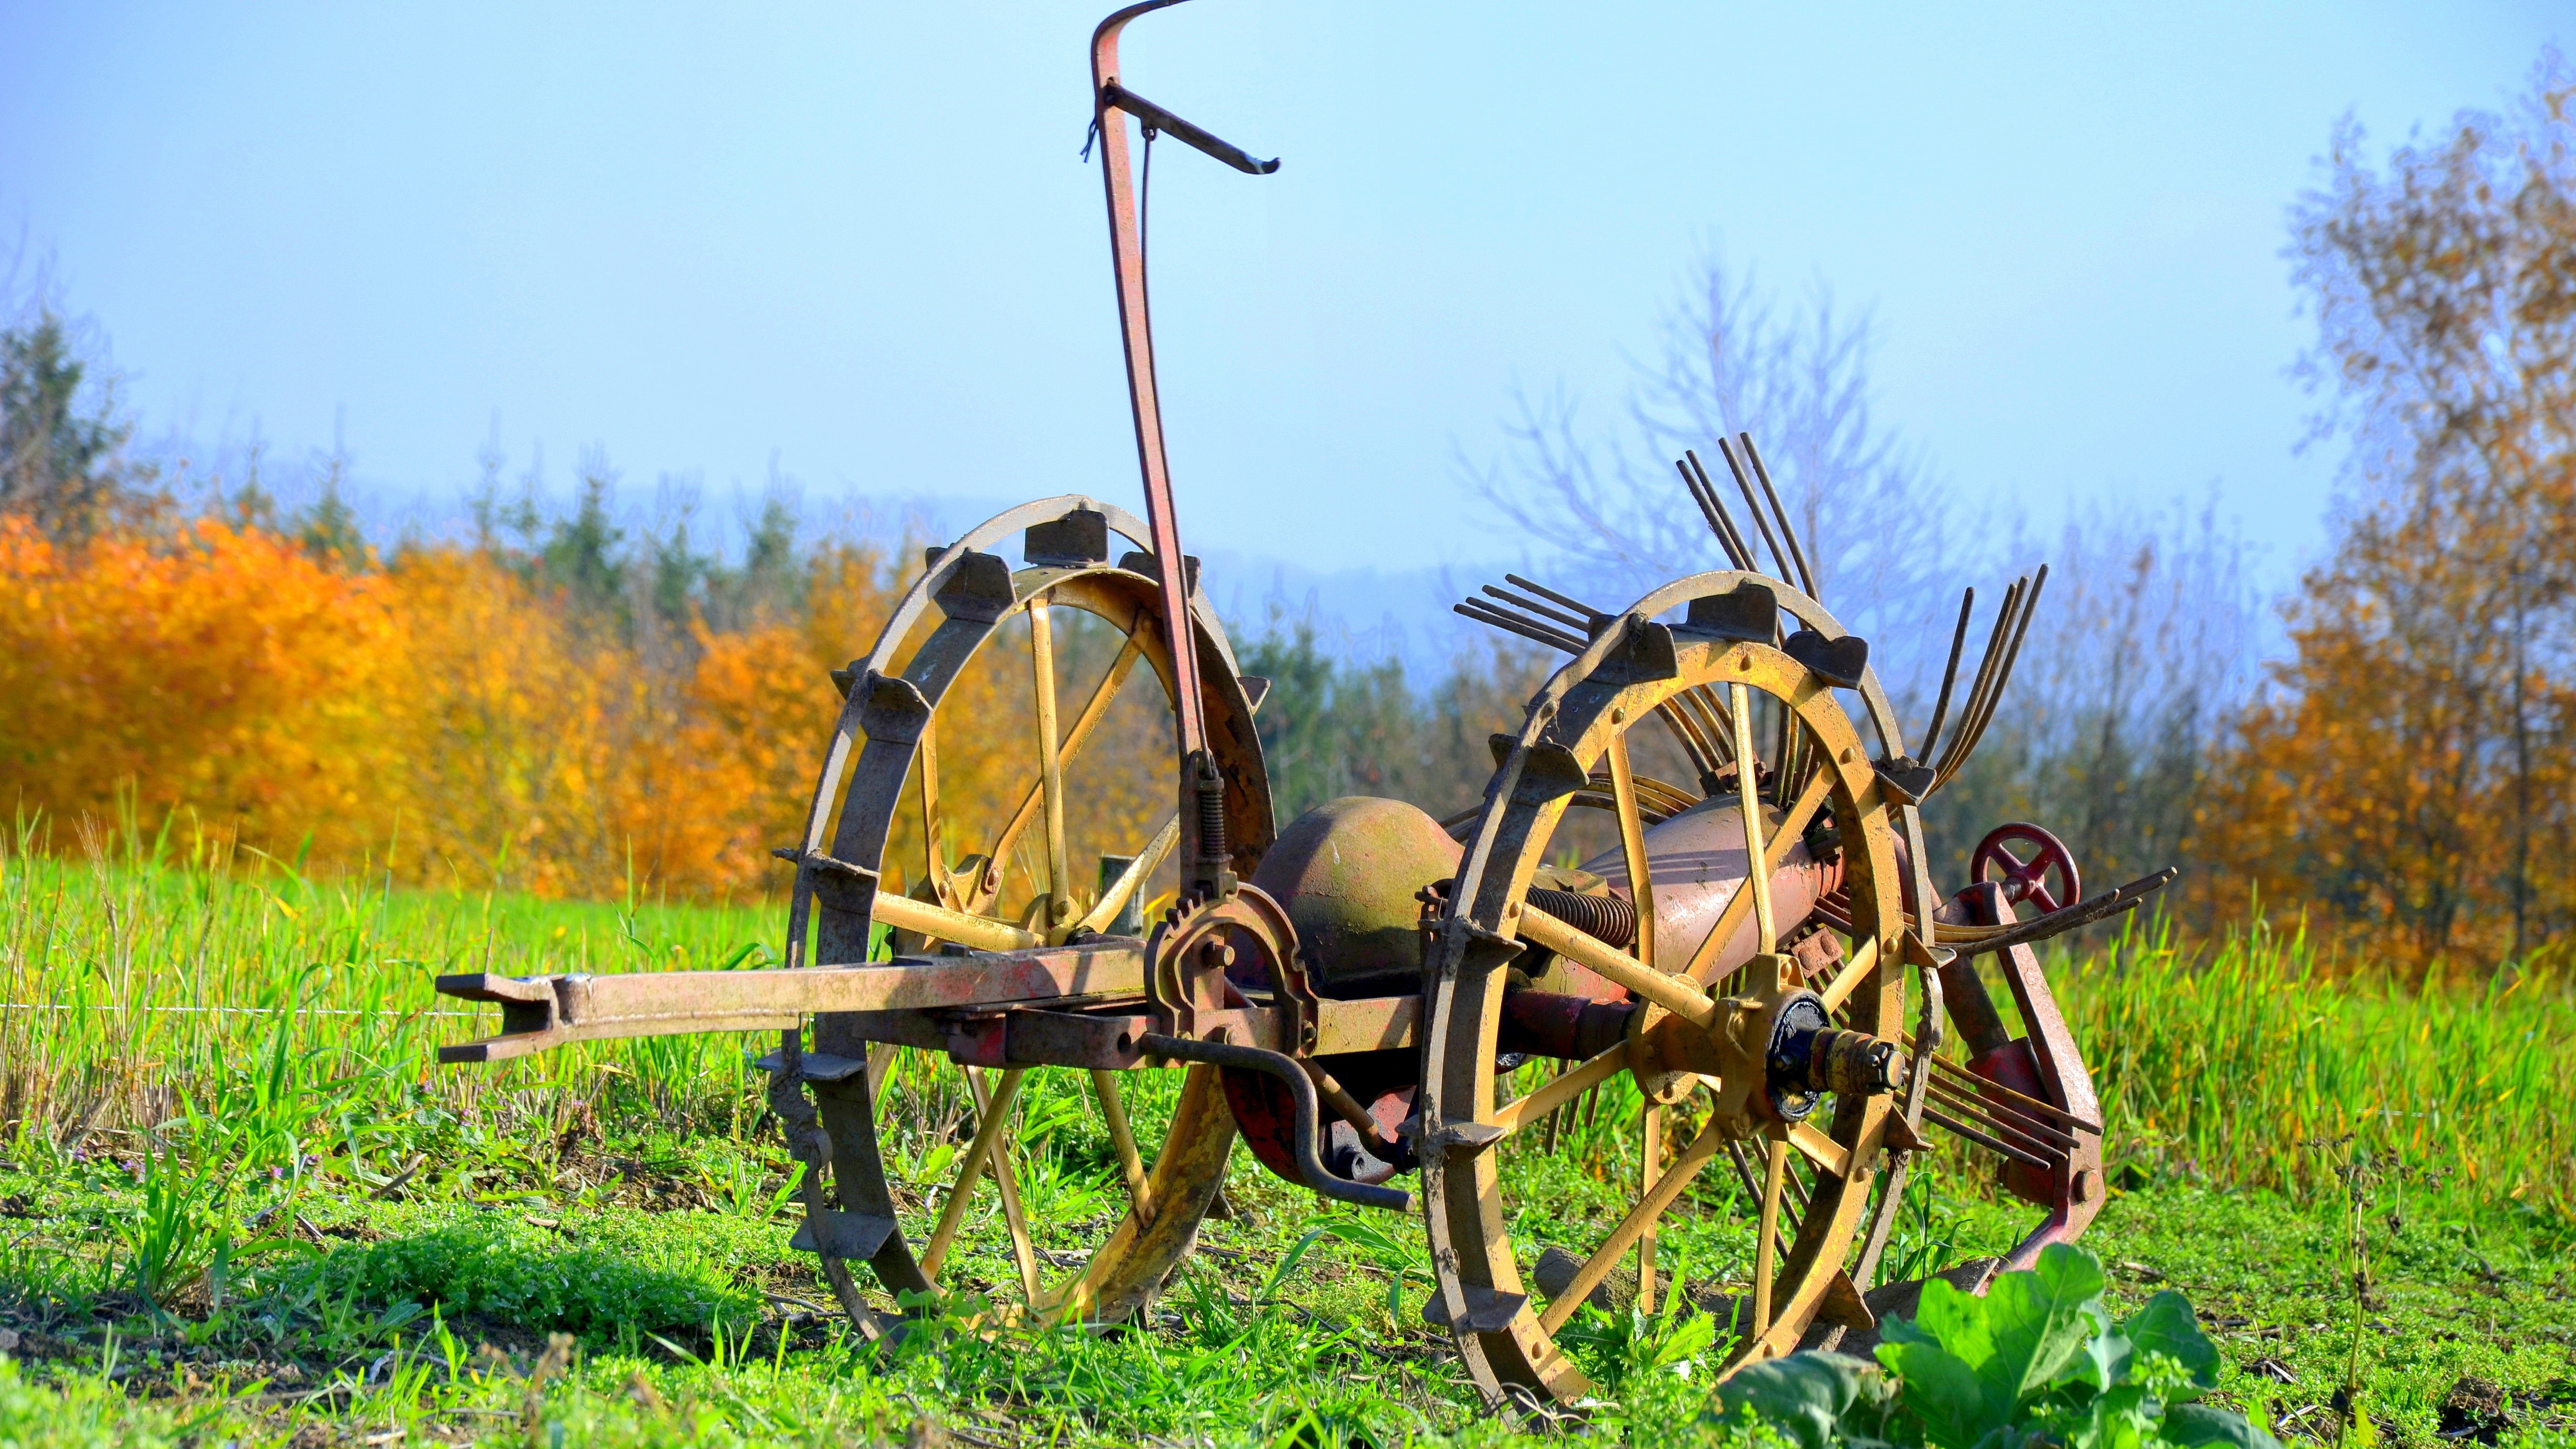 Horse Cart on Field Against Sky, Agriculture, Hayfield, Trees, Rural, HQ Photo